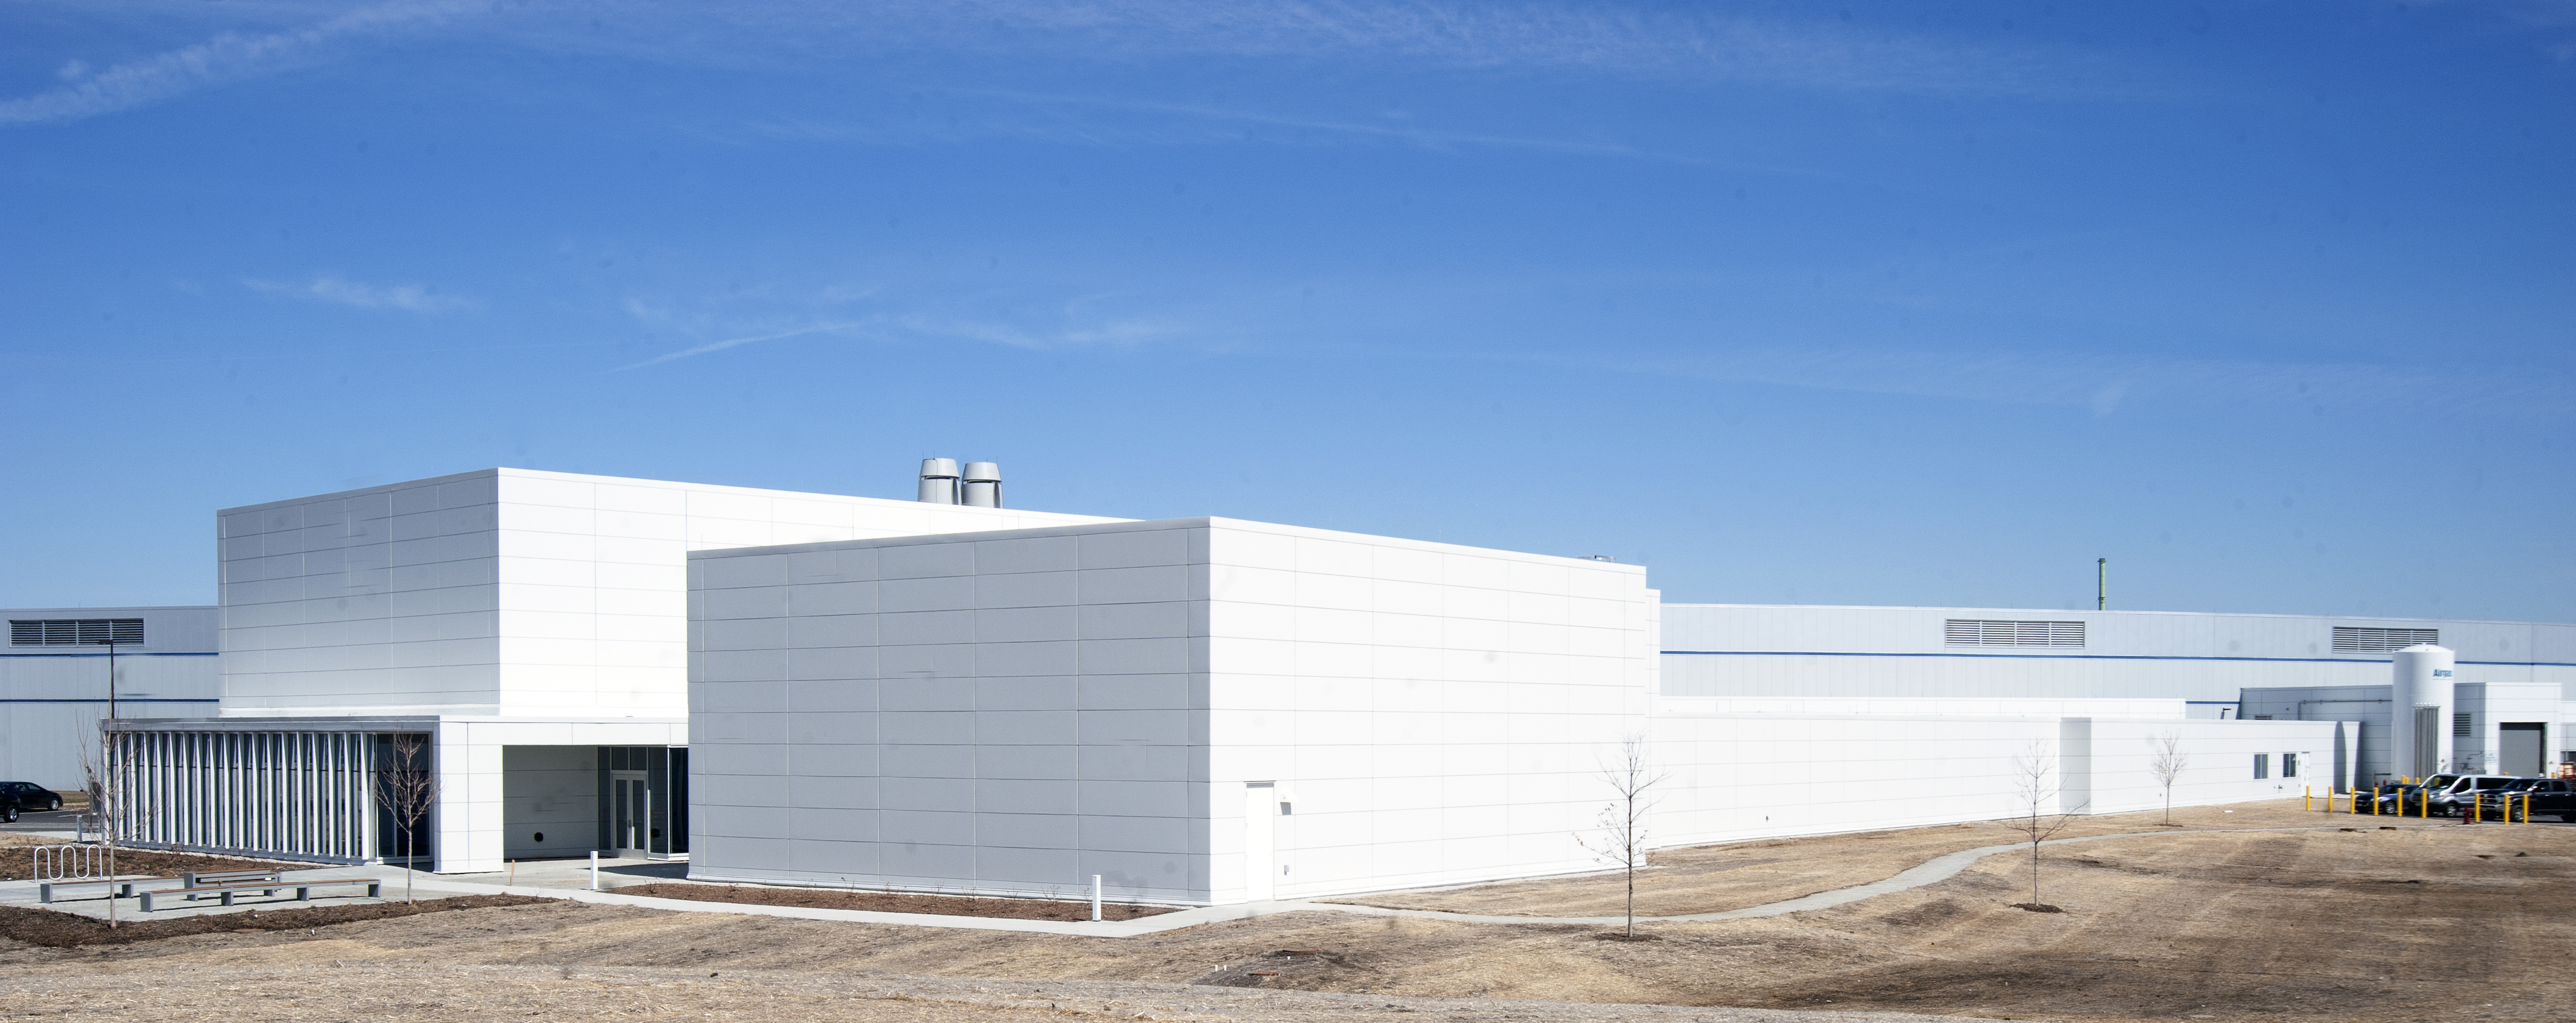 The Long Beamline Building, which will house the High-Energy X-ray Microscope (HEXM) and the In Situ Nanoprobe (ISN). (Image by Rick Fenner, Argonne National Laboratory.)